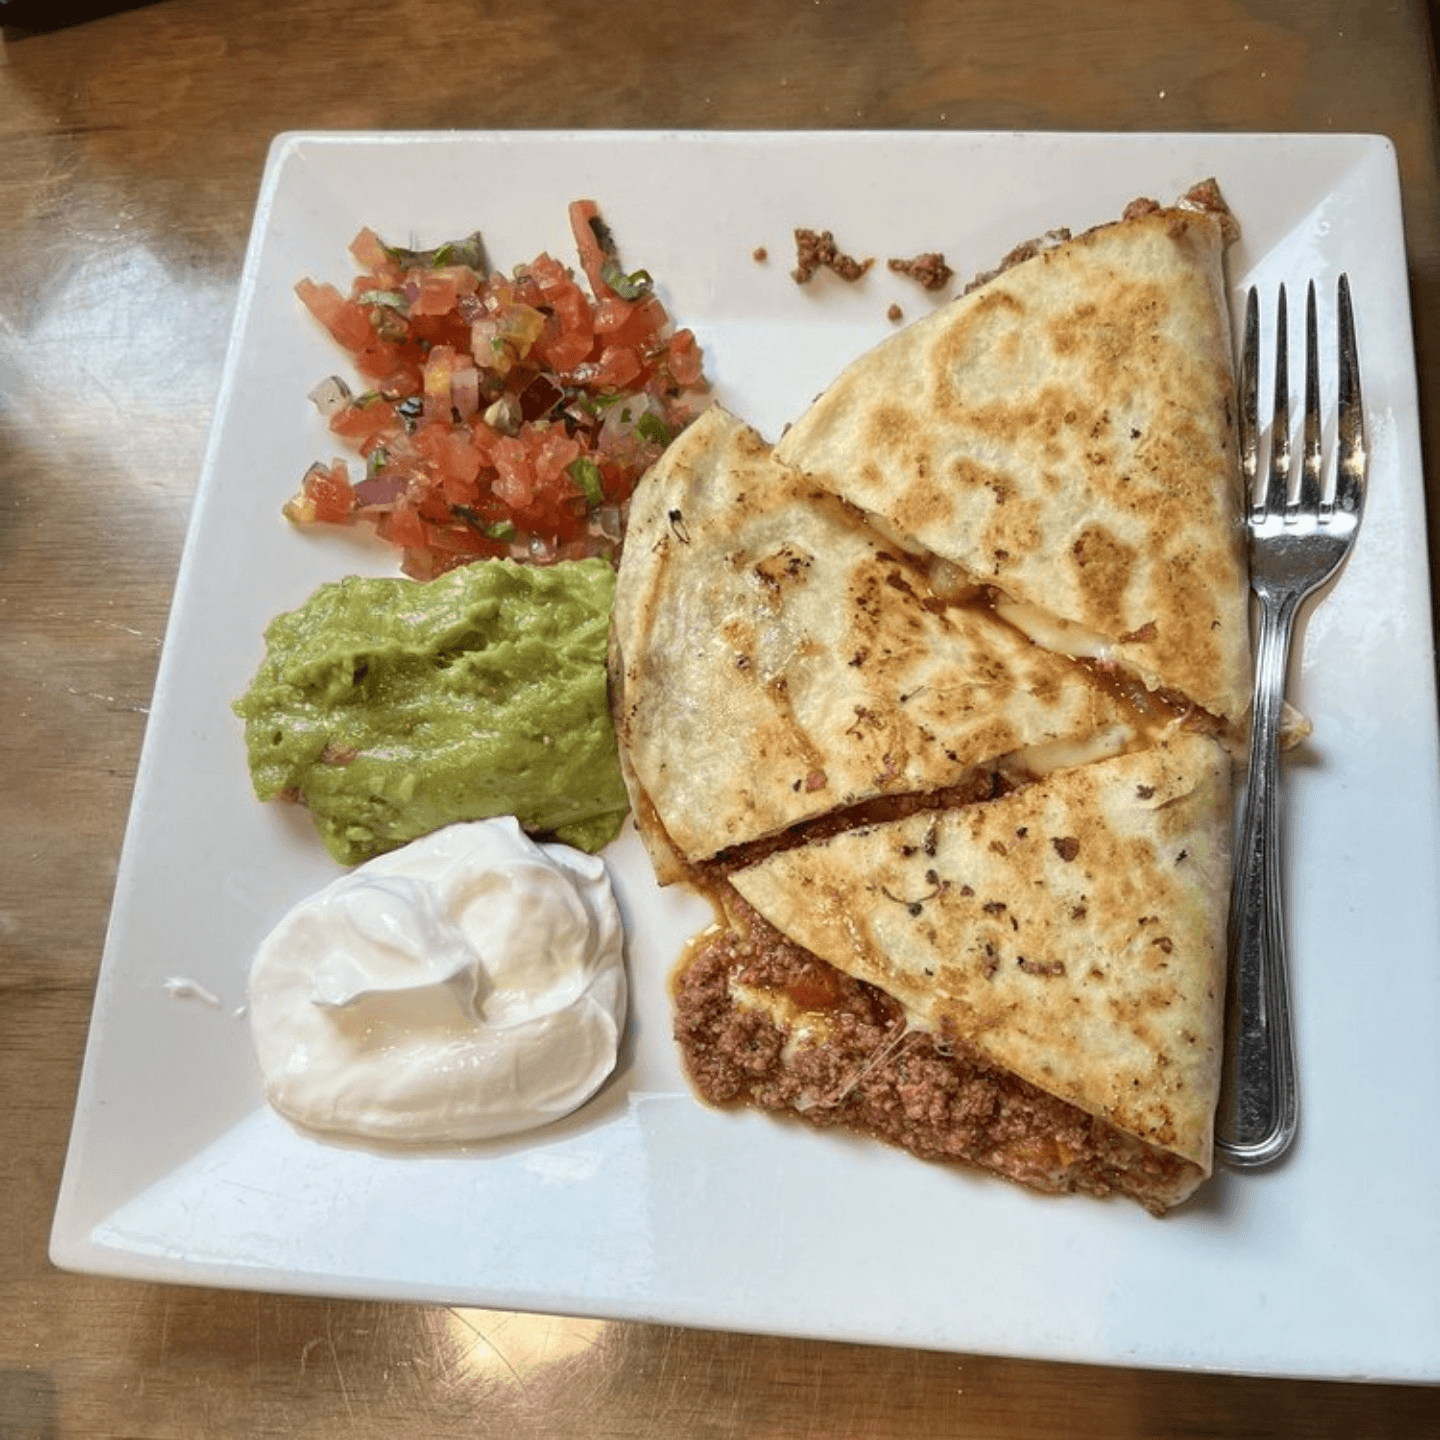 Quesadillas, Tacos, Ceviches, Oh My!